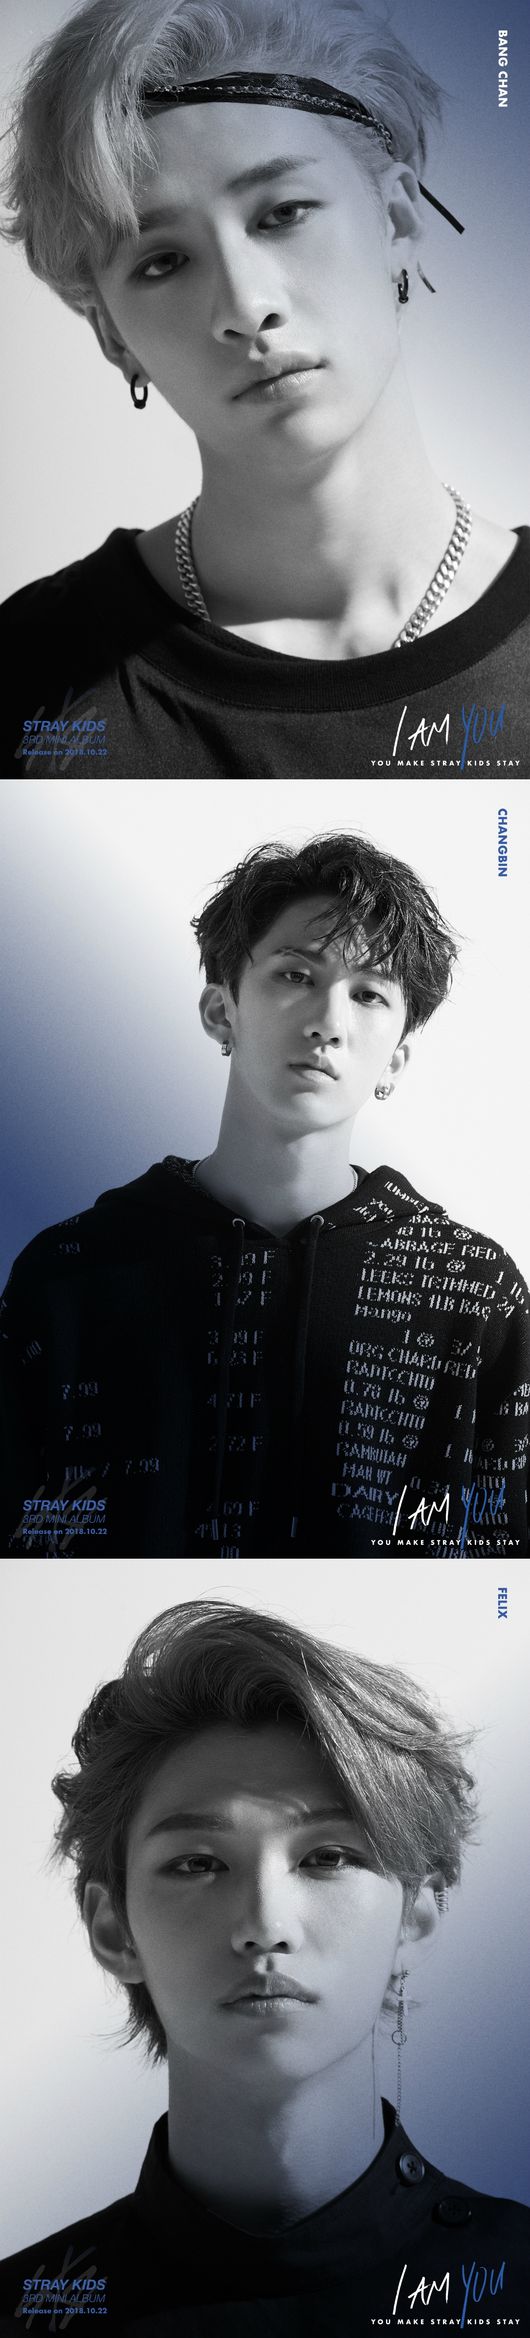 Fans expectations for the new song are rising as images of Bangchan, Changbin and Felix, the last protagonists of Teaser, the Dog of the new Stray Kids song I Am YOU, are being played.JYP Entertainment (hereinafter referred to as JYP) presented 10 units of Bangchan, Changbin, Felix and Dog, Teaser images with the concept of IM Yu on its official SNS channel and Stray Kids at 0:00 on the 14th.This was followed by Lee, Hyunjin, and Woojin, Seungmin, and Aien Teaser, who were Dog at 0:00 on the 12th, and they caught their attention with their colorful charms and Dog castles.In the teaser image, the side dish stared at the front with a gentle eye and stimulated the fan with the atmosphere like the main character in the cartoon.Changbin flaunted her sophisticated visuals with sleek eyes and charismatic look.Felix is attracting attention by radiating a classic charm by digesting a hairstyle that seems to be blown by the wind.On the 22nd, Stray Kids, who is returning to her third mini album, IM You, sings a message of hope that I will grow and get the power to overcome anything because of you, who has the same troubles with me, you who dream with me, and you who will be my will.Following the debut mini album I Am NOT, which sang wandering to find identity, and the mini-titled I Am WHO, which contains efforts to find an answer and anxieties about it, this time, we will meet with fans in a more growing way through these processes.The album I M You includes a total of 8 tracks including the title songs of Dongmyeong, YOU, Pyeon, Haejangguk, Get Cool, Play and Drama, 0325, Mixtape #3 (CD ONLY).Following his debut album and mini-second album, Stray Kids added musical authenticity by participating in the writing and composition of all songs.On the other hand, Stray Kids will do a comeback showcase UNVEIL [Op.03: I am YOU] at the Olympic Hall in Bangi-dong Olympic Park, Songpa-gu, Seoul, at 6 pm on the 21st, the day before the album release.In Showcase, the mini-album Im Yu title song and the stage of the songs will be the first to be released and will be firmly established as 2018 Best New Artist in the Music Industry.JYP Entertainment